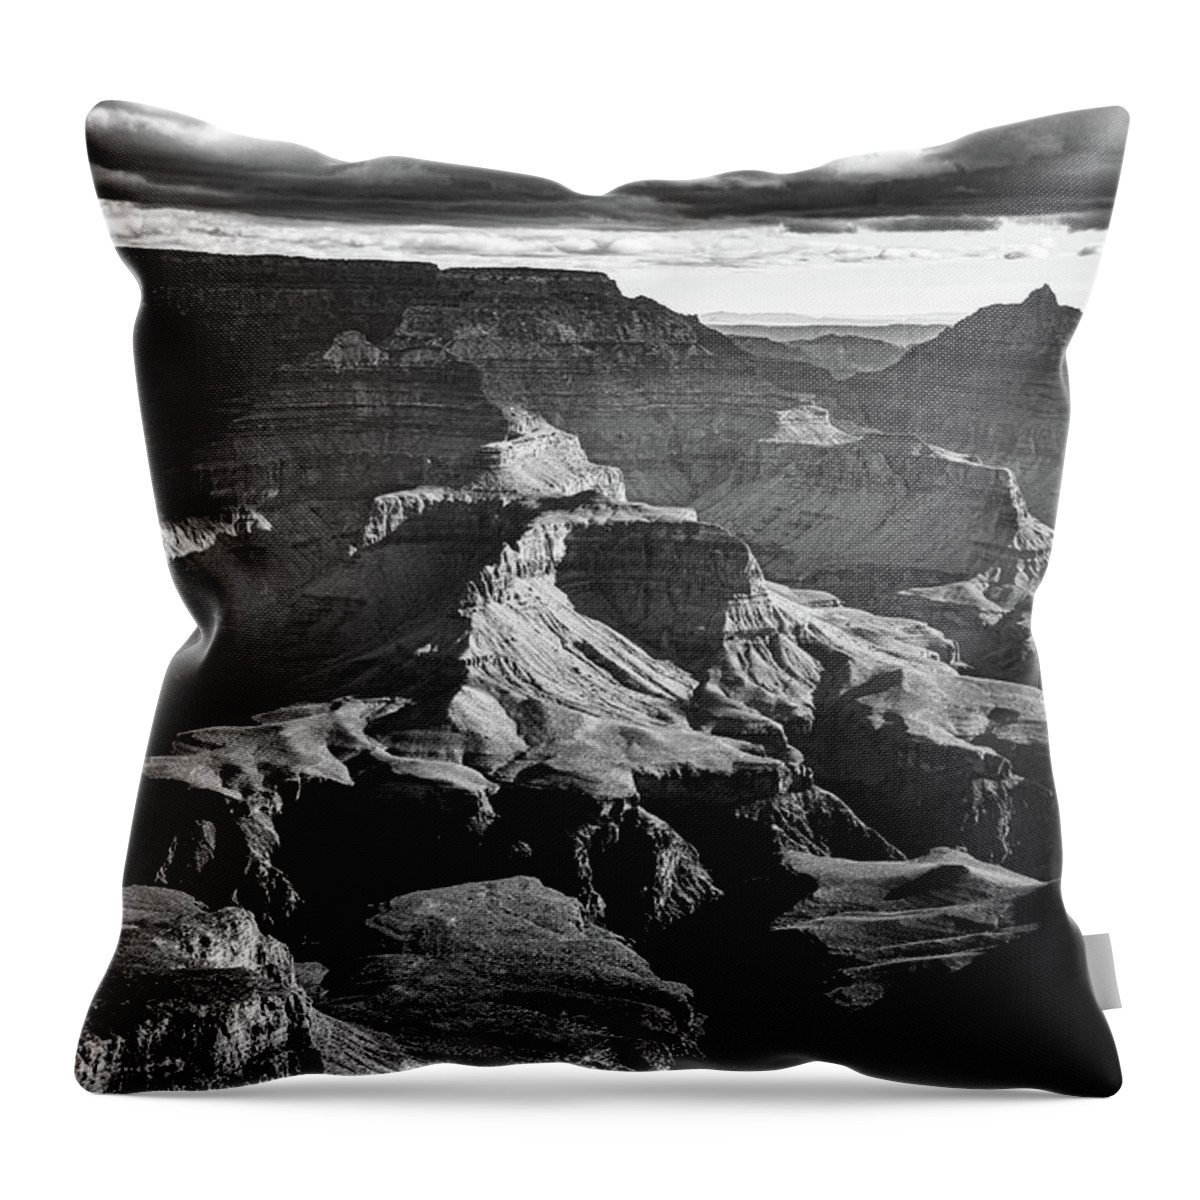 Grand Canyon Throw Pillow featuring the photograph Canyon Light by Susie Loechler